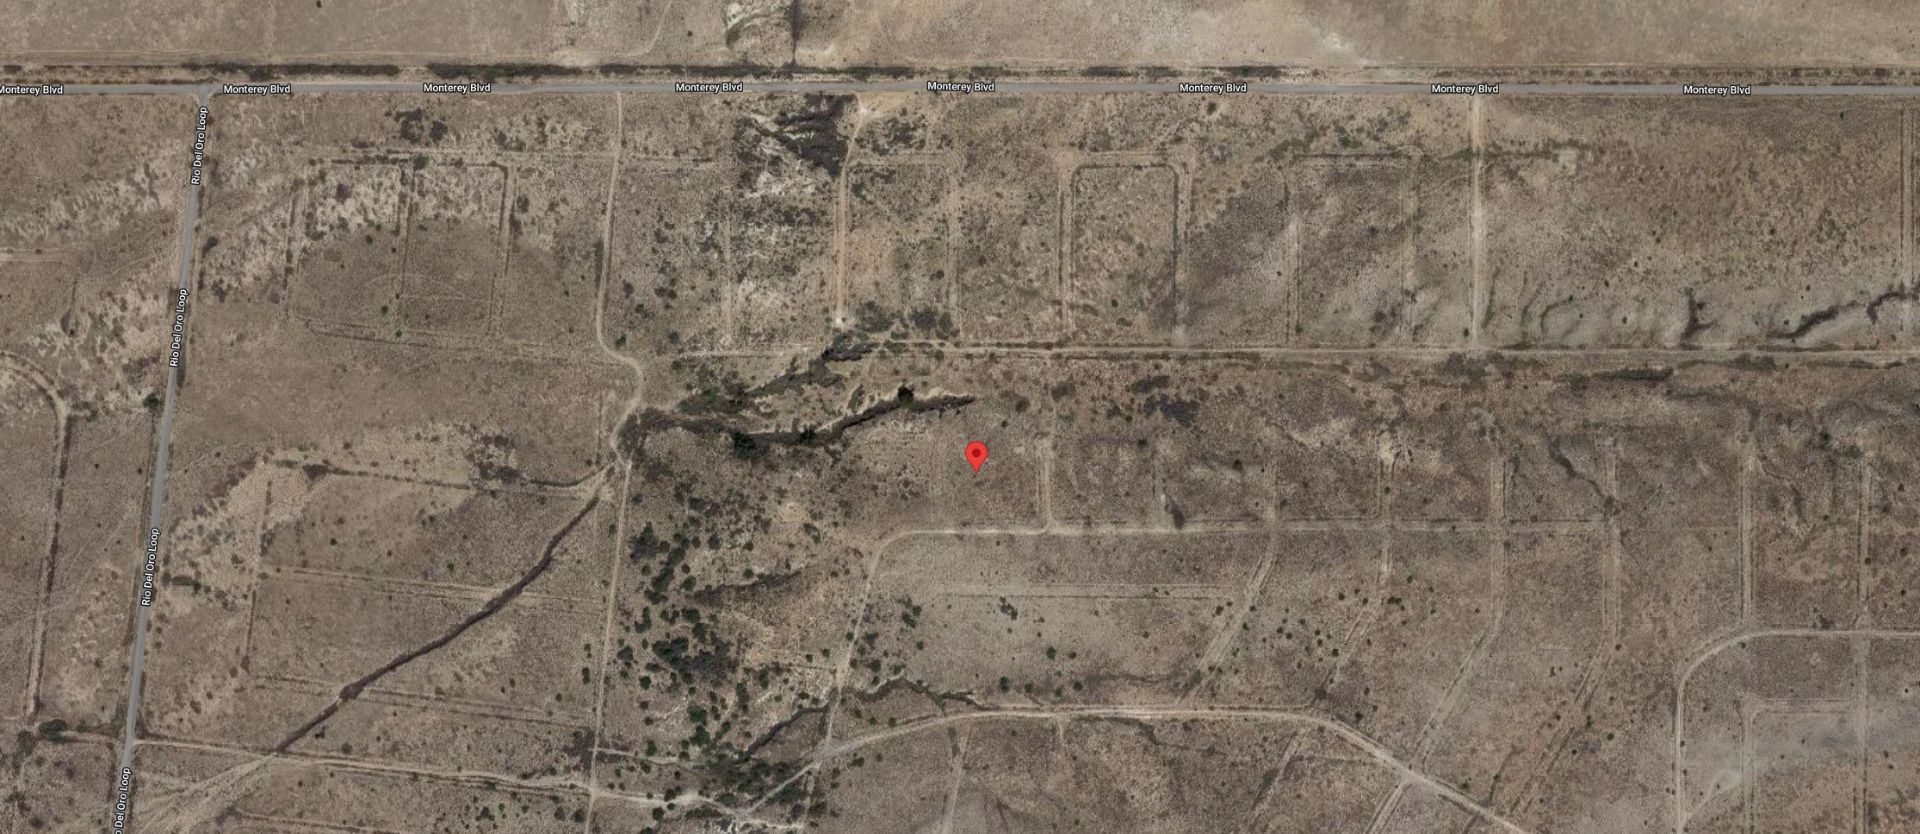 Half-Acre Lot Near the Mountains in New Mexico! - Image 10 of 16